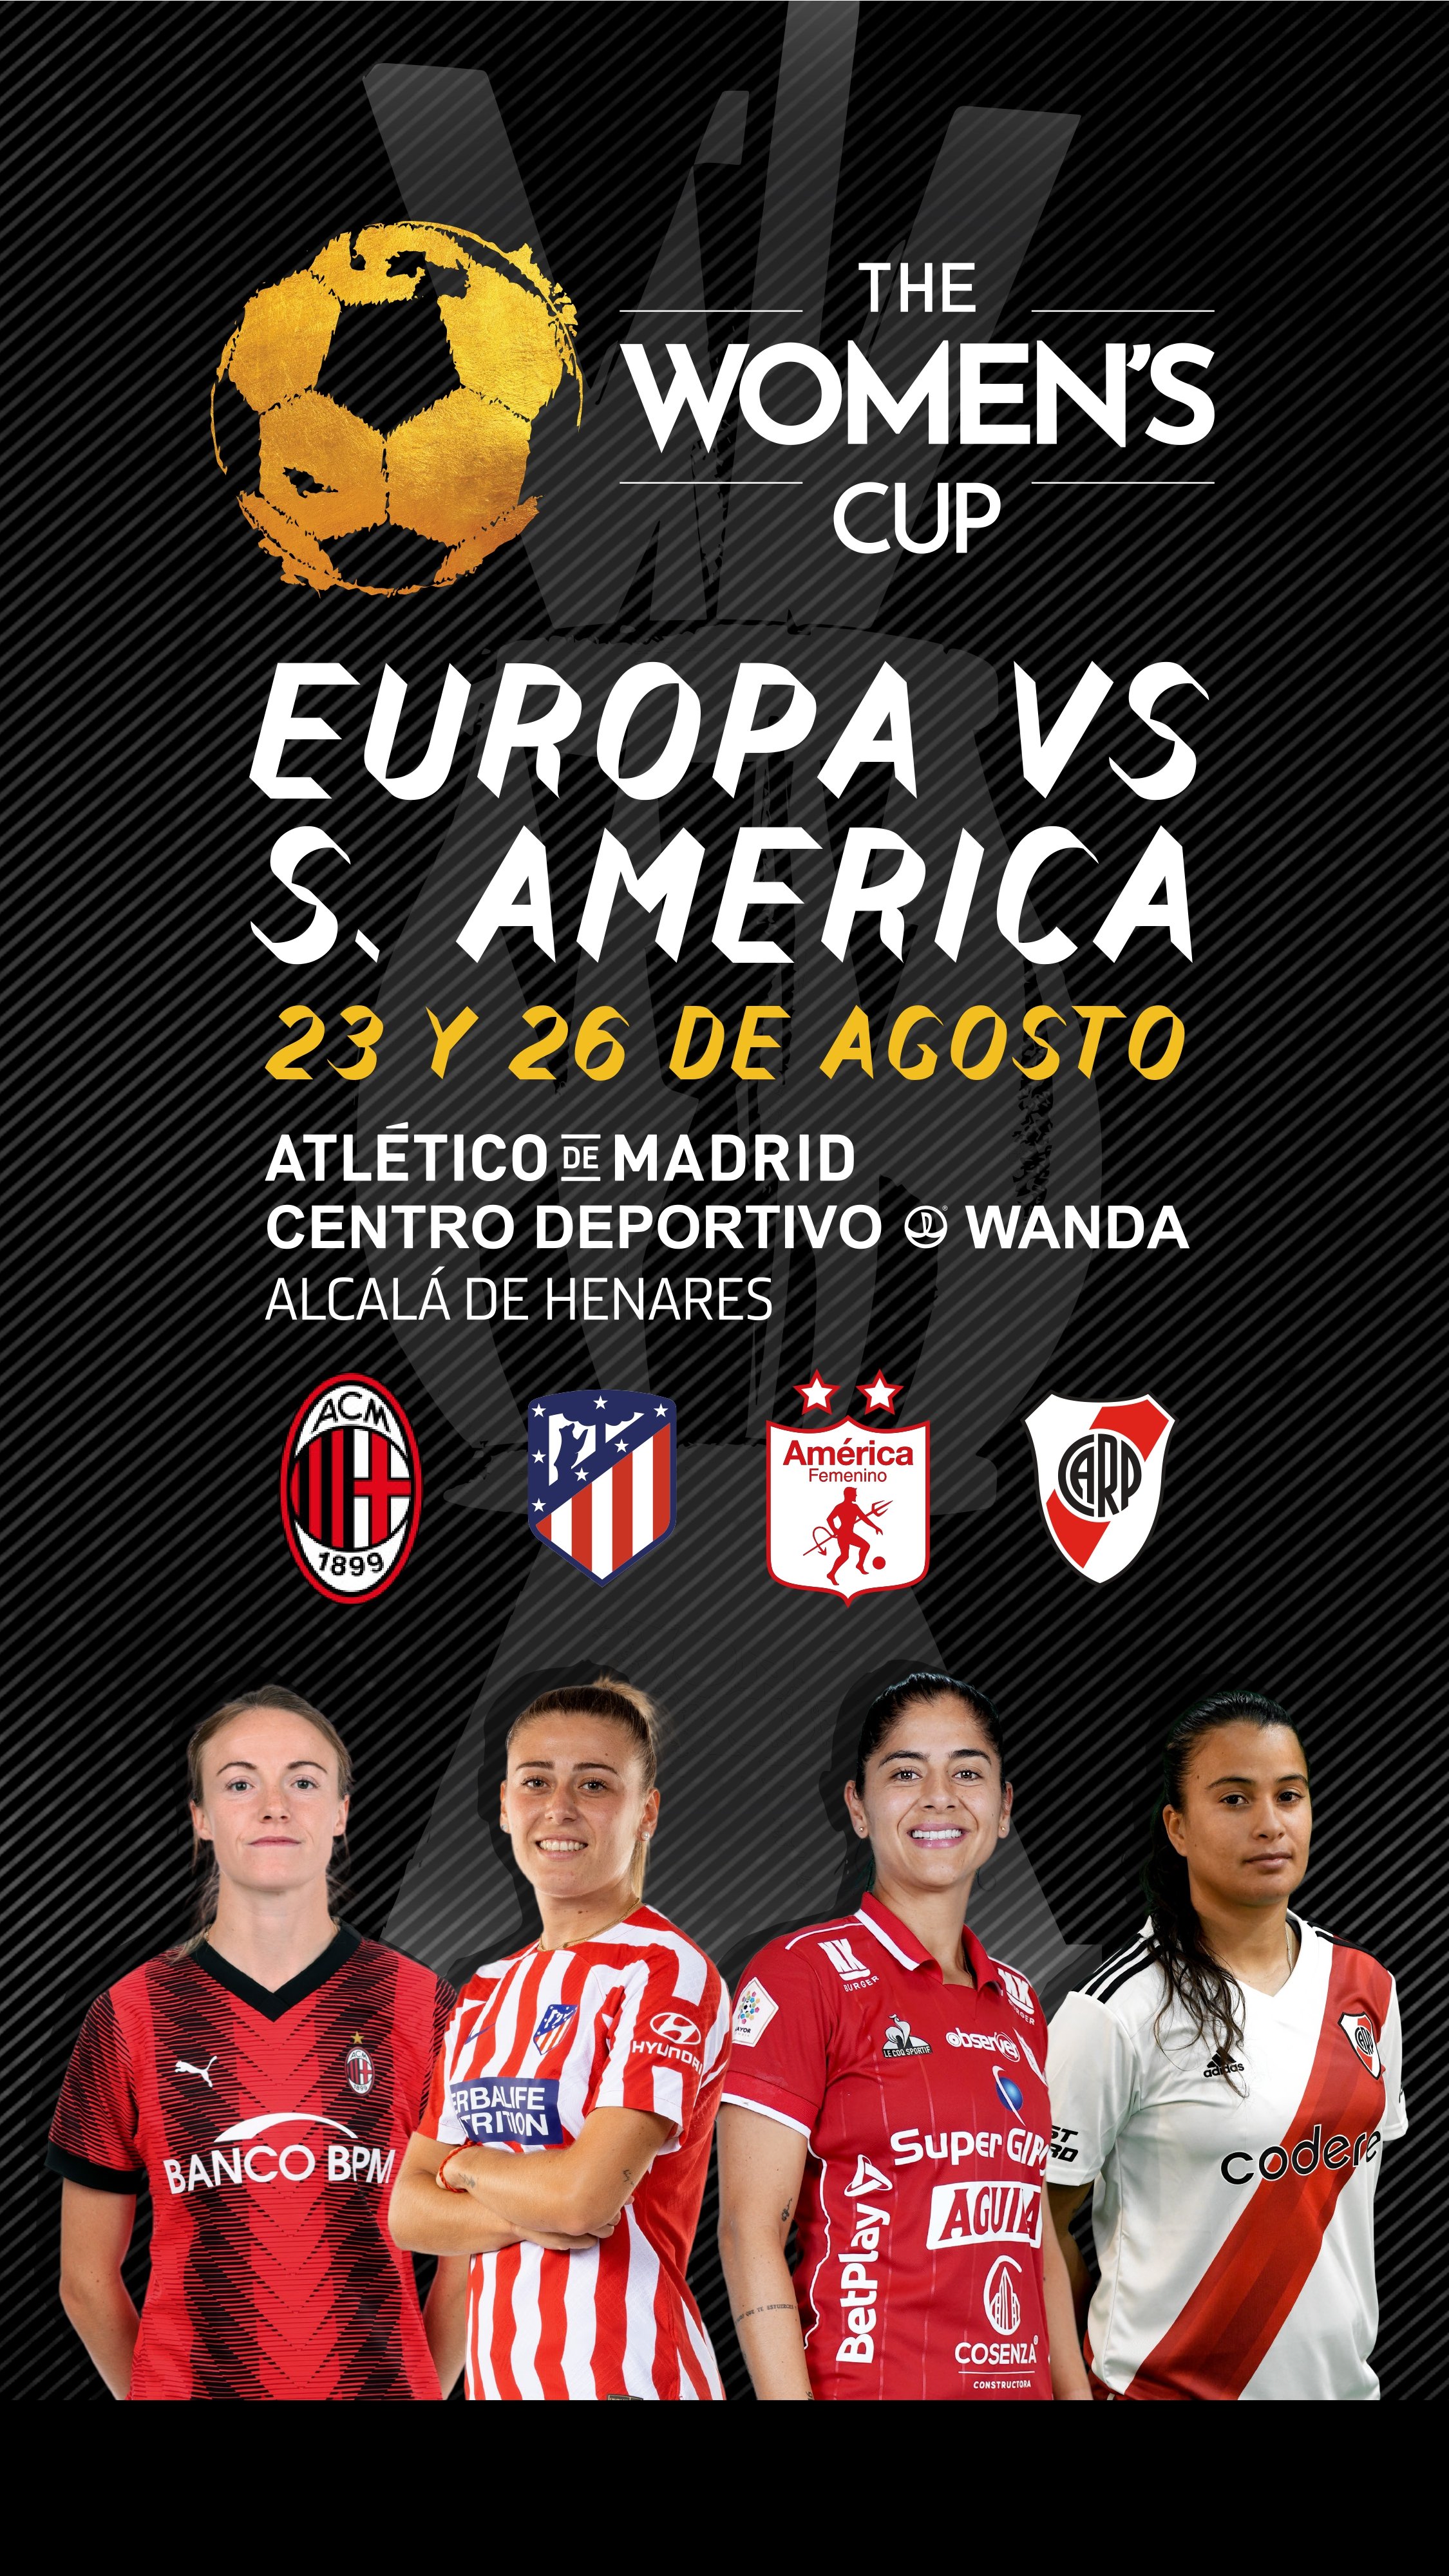 Home - The women's Cup